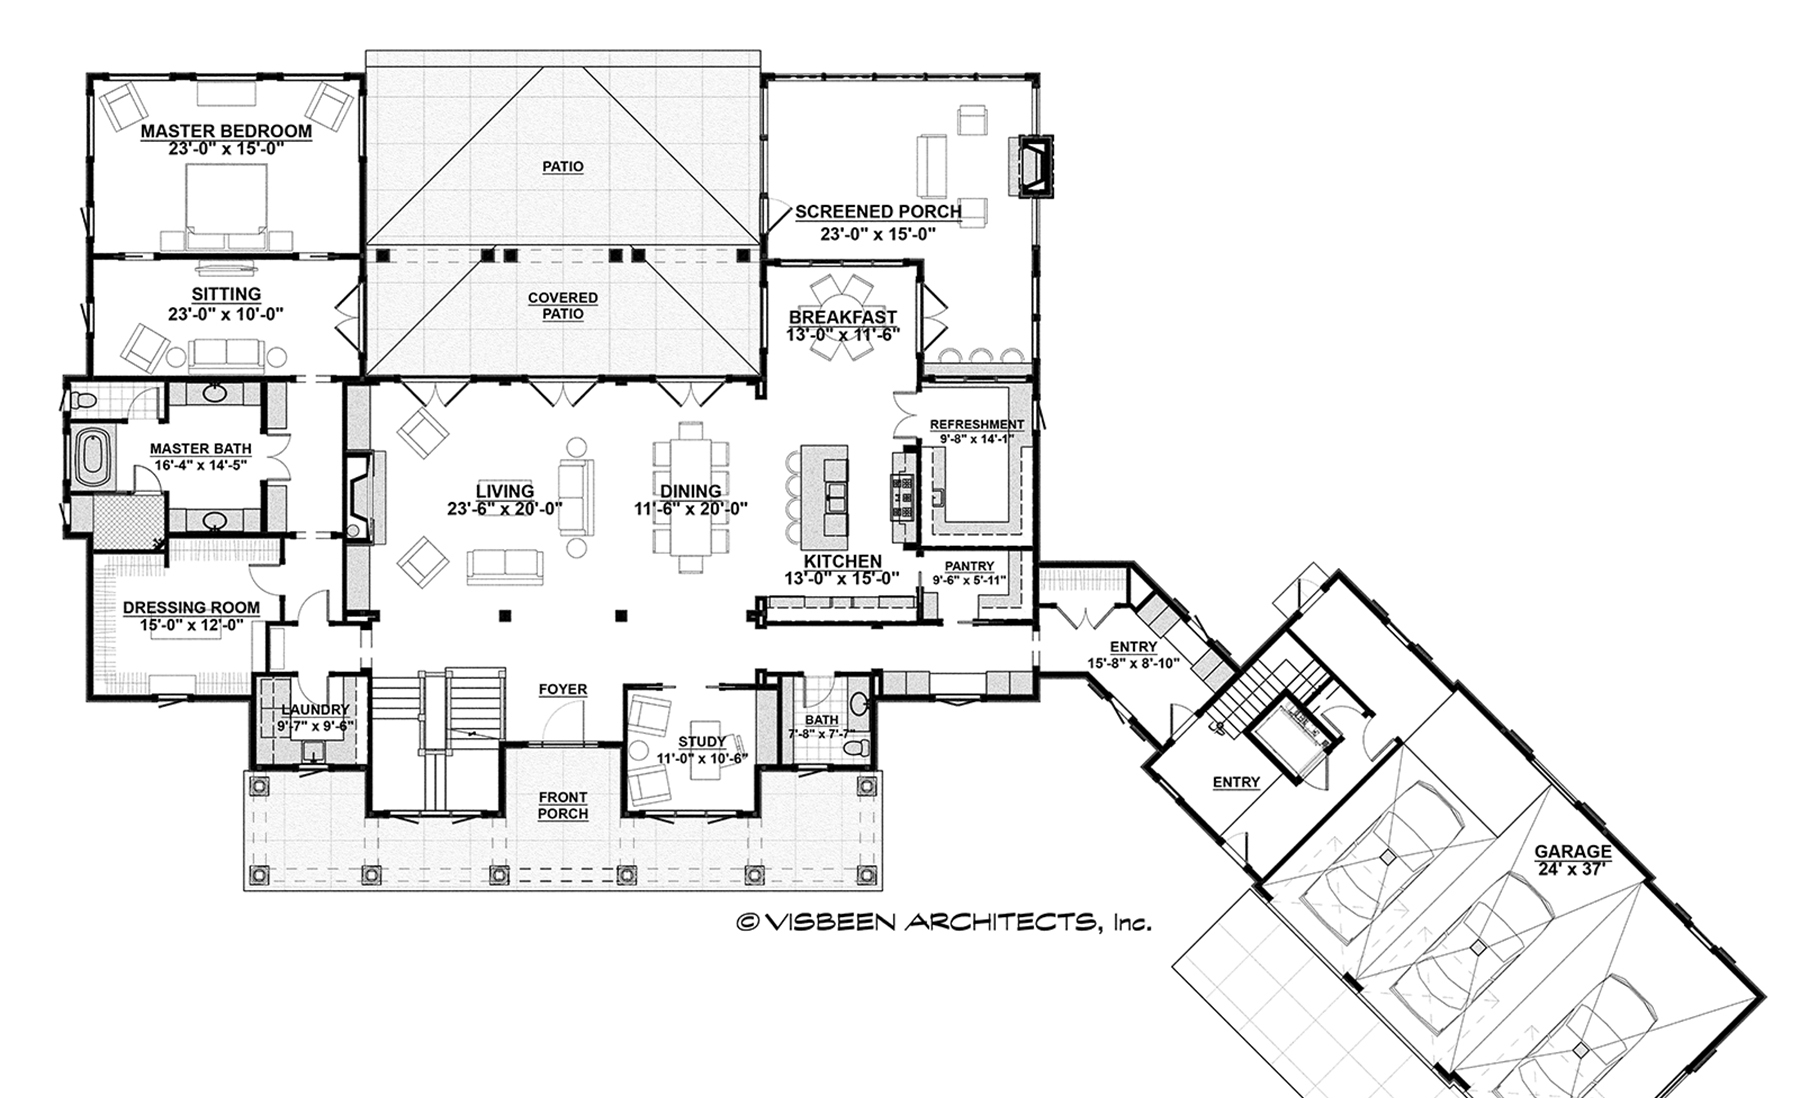 Home plan inspired by Low Country Architecture.